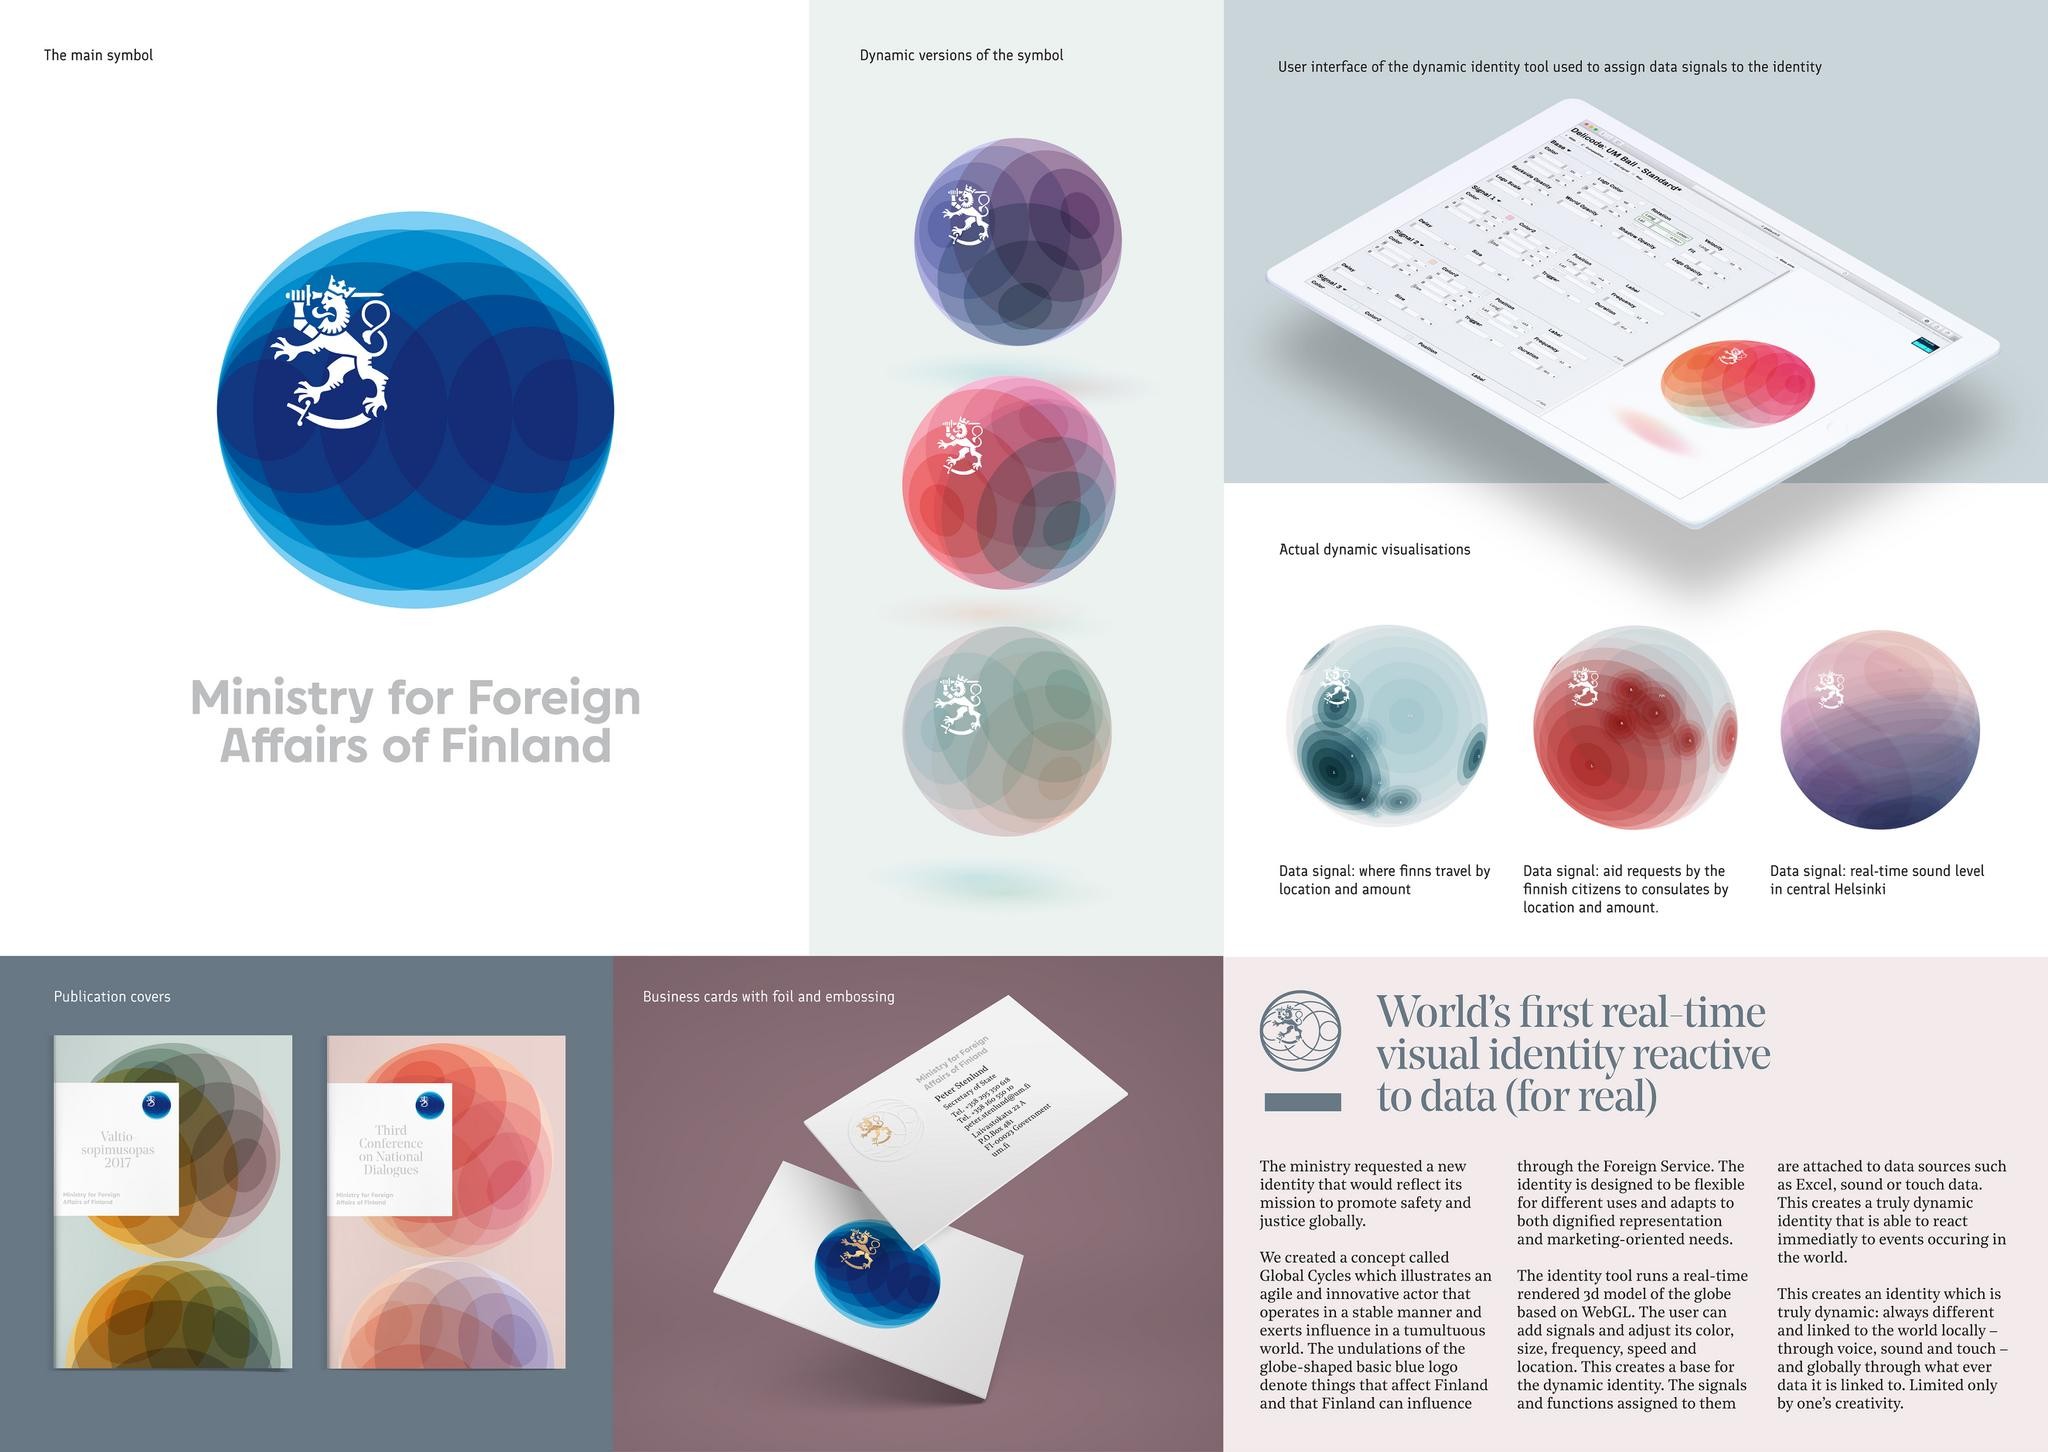 Ministry for Foreign Affairs of Finland identity